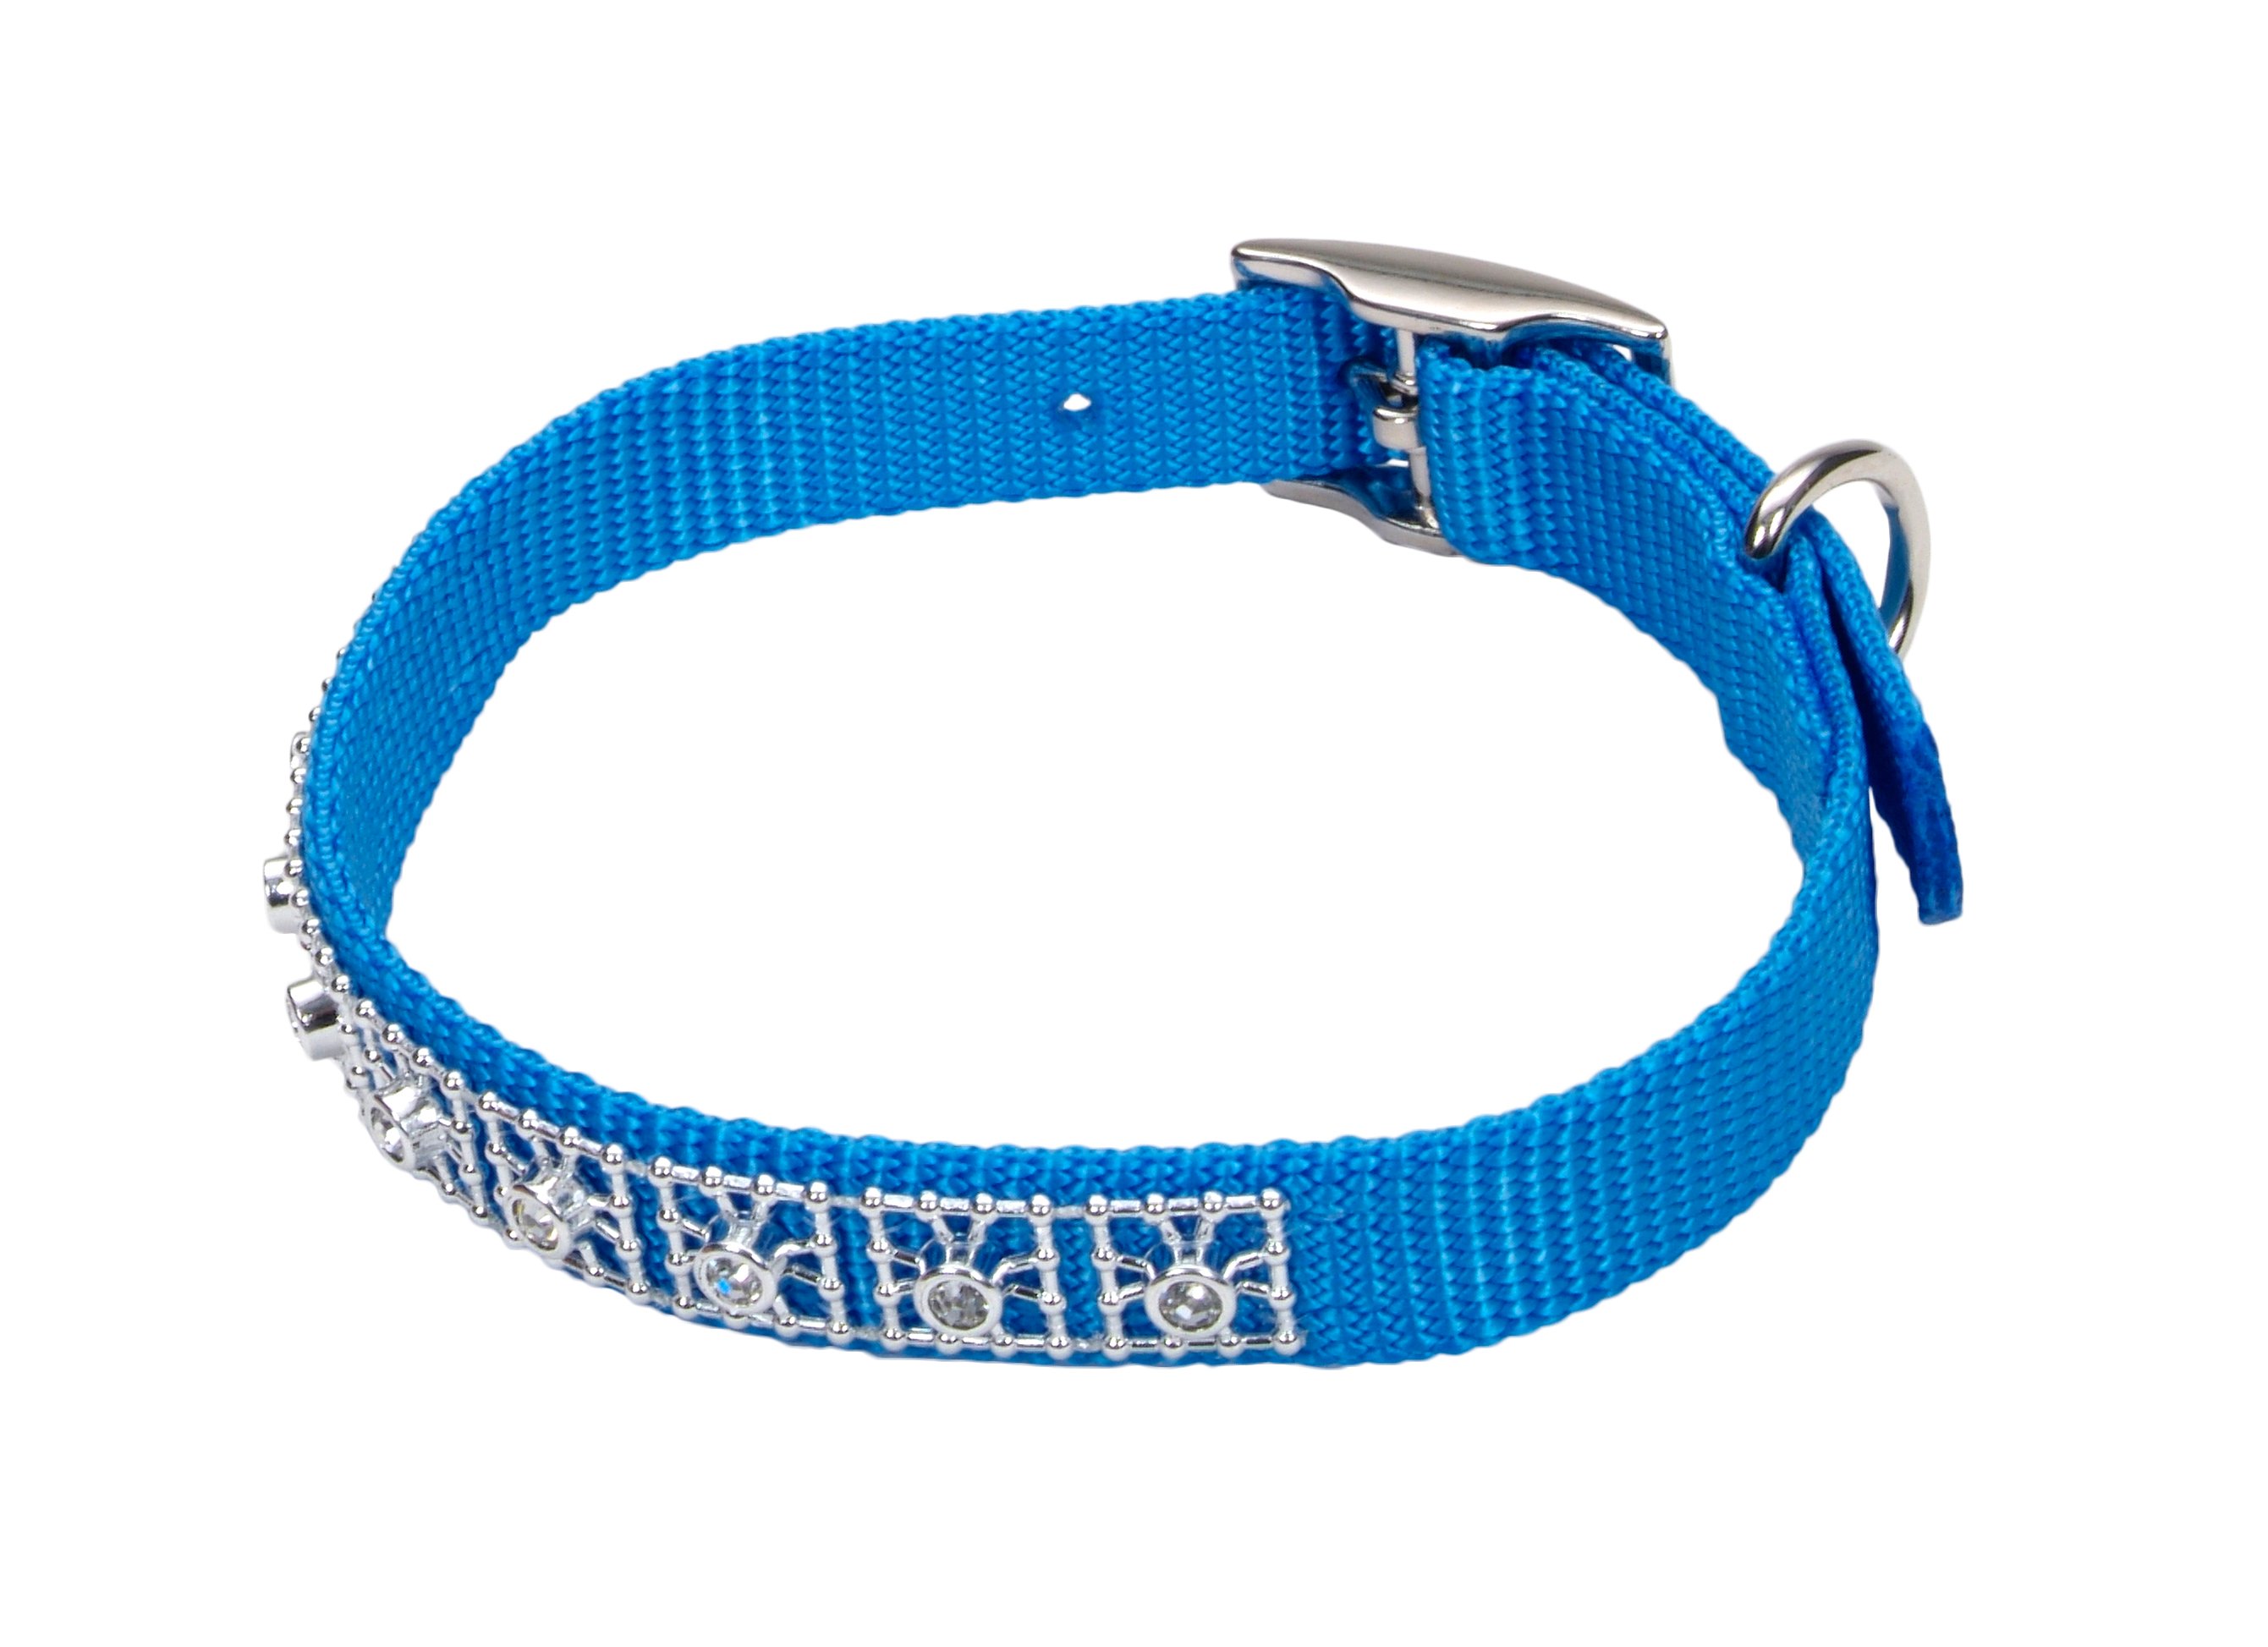 Sublime Adjustable Collar Blue Waves With Blue Checkers Dog 1pc 3/4x8-12in